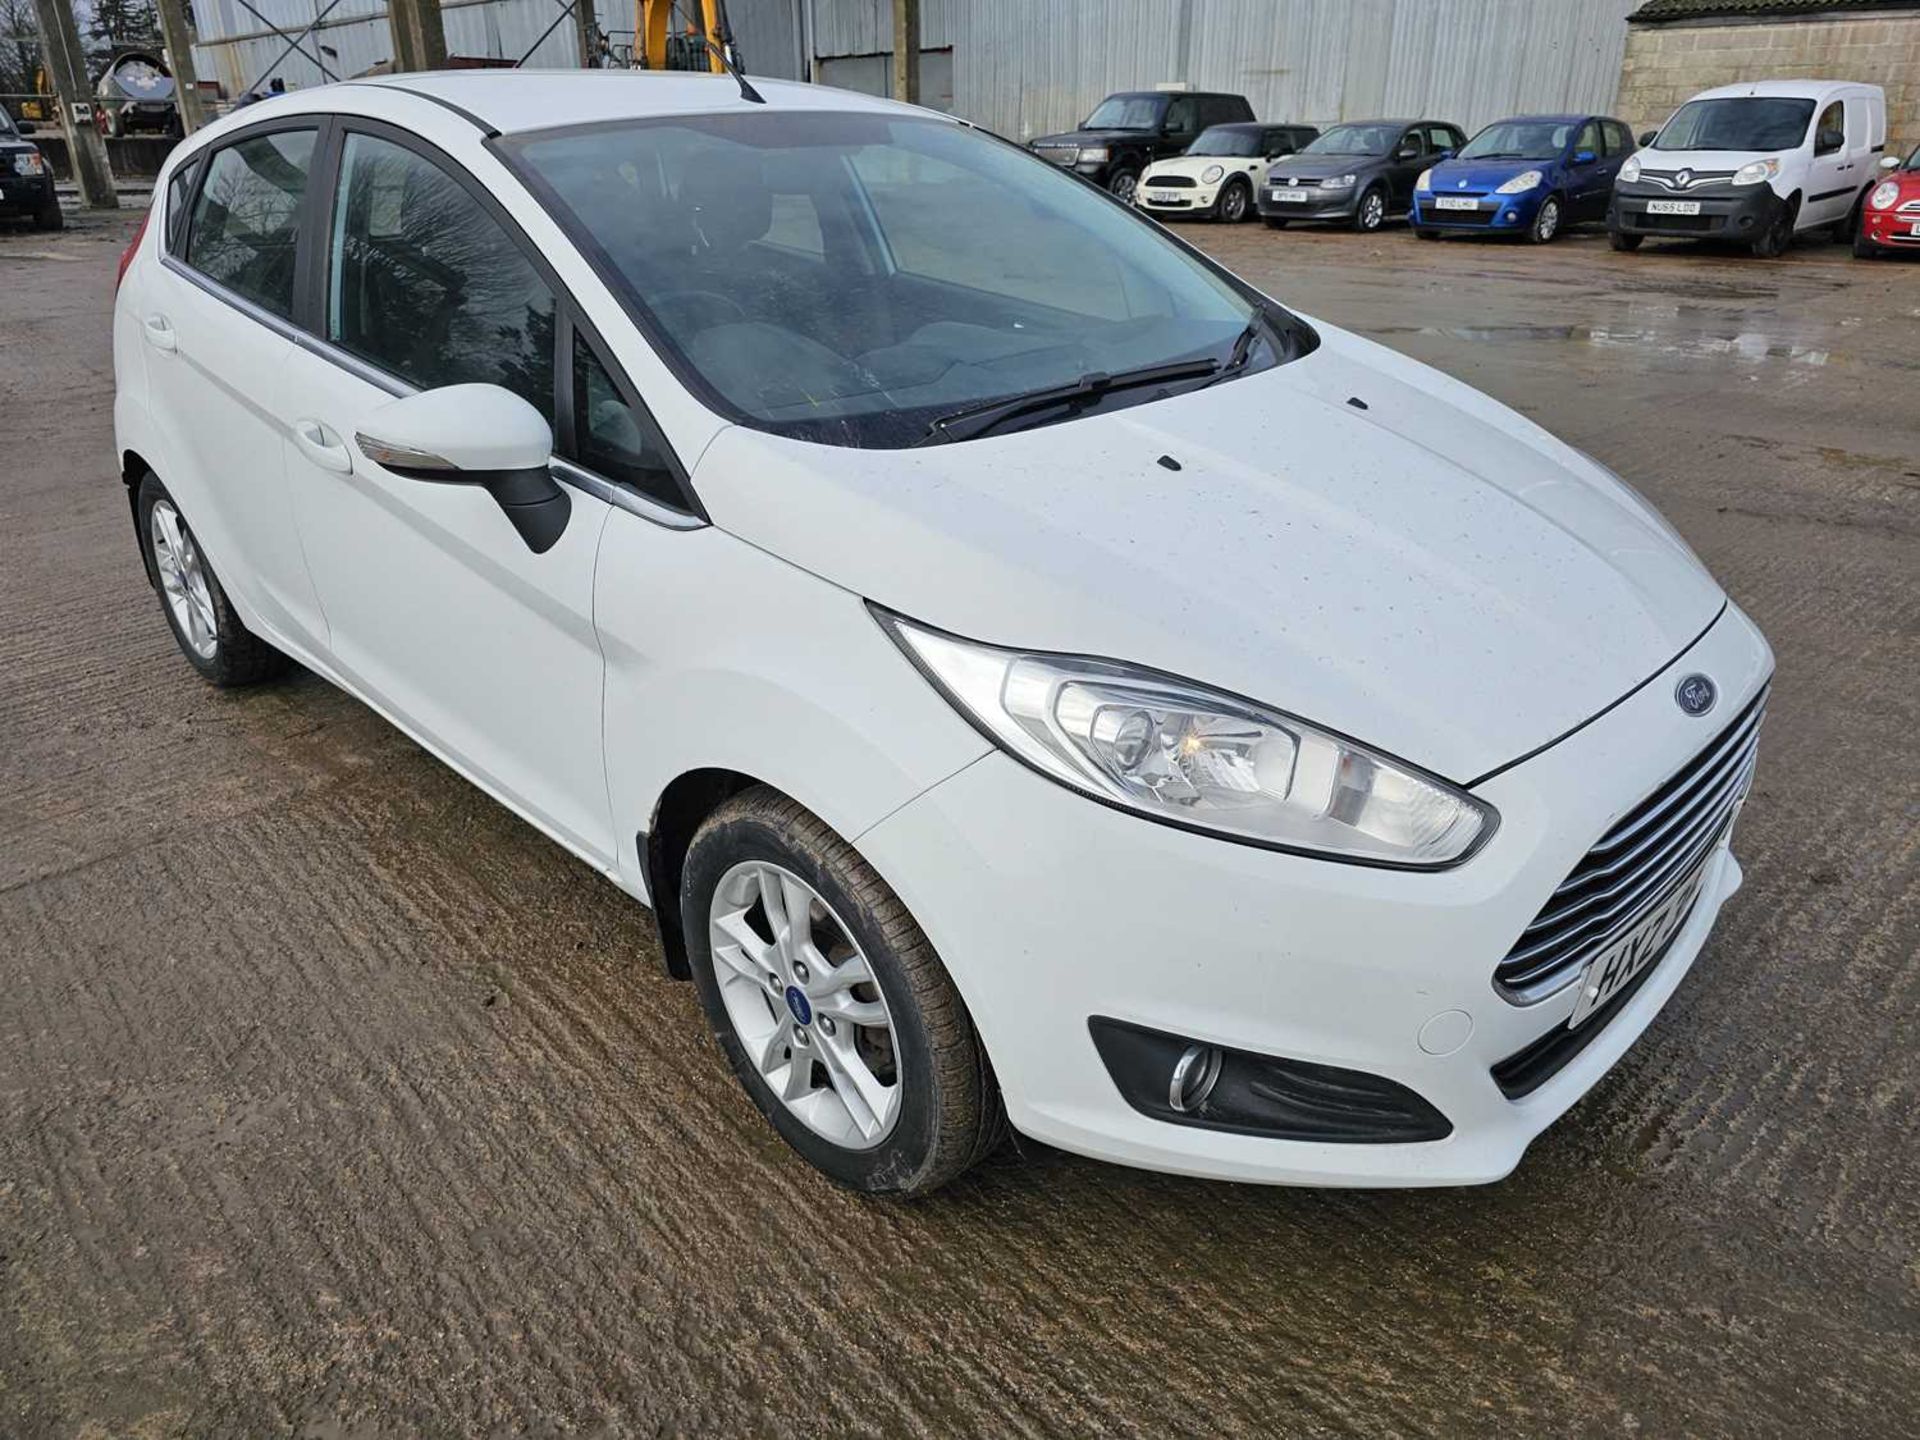 2015 Ford Fiesta, 5 Speed, Bluetooth, A/C (Reg. Docs. & Service History Available, Tested 01/25) - Image 8 of 28